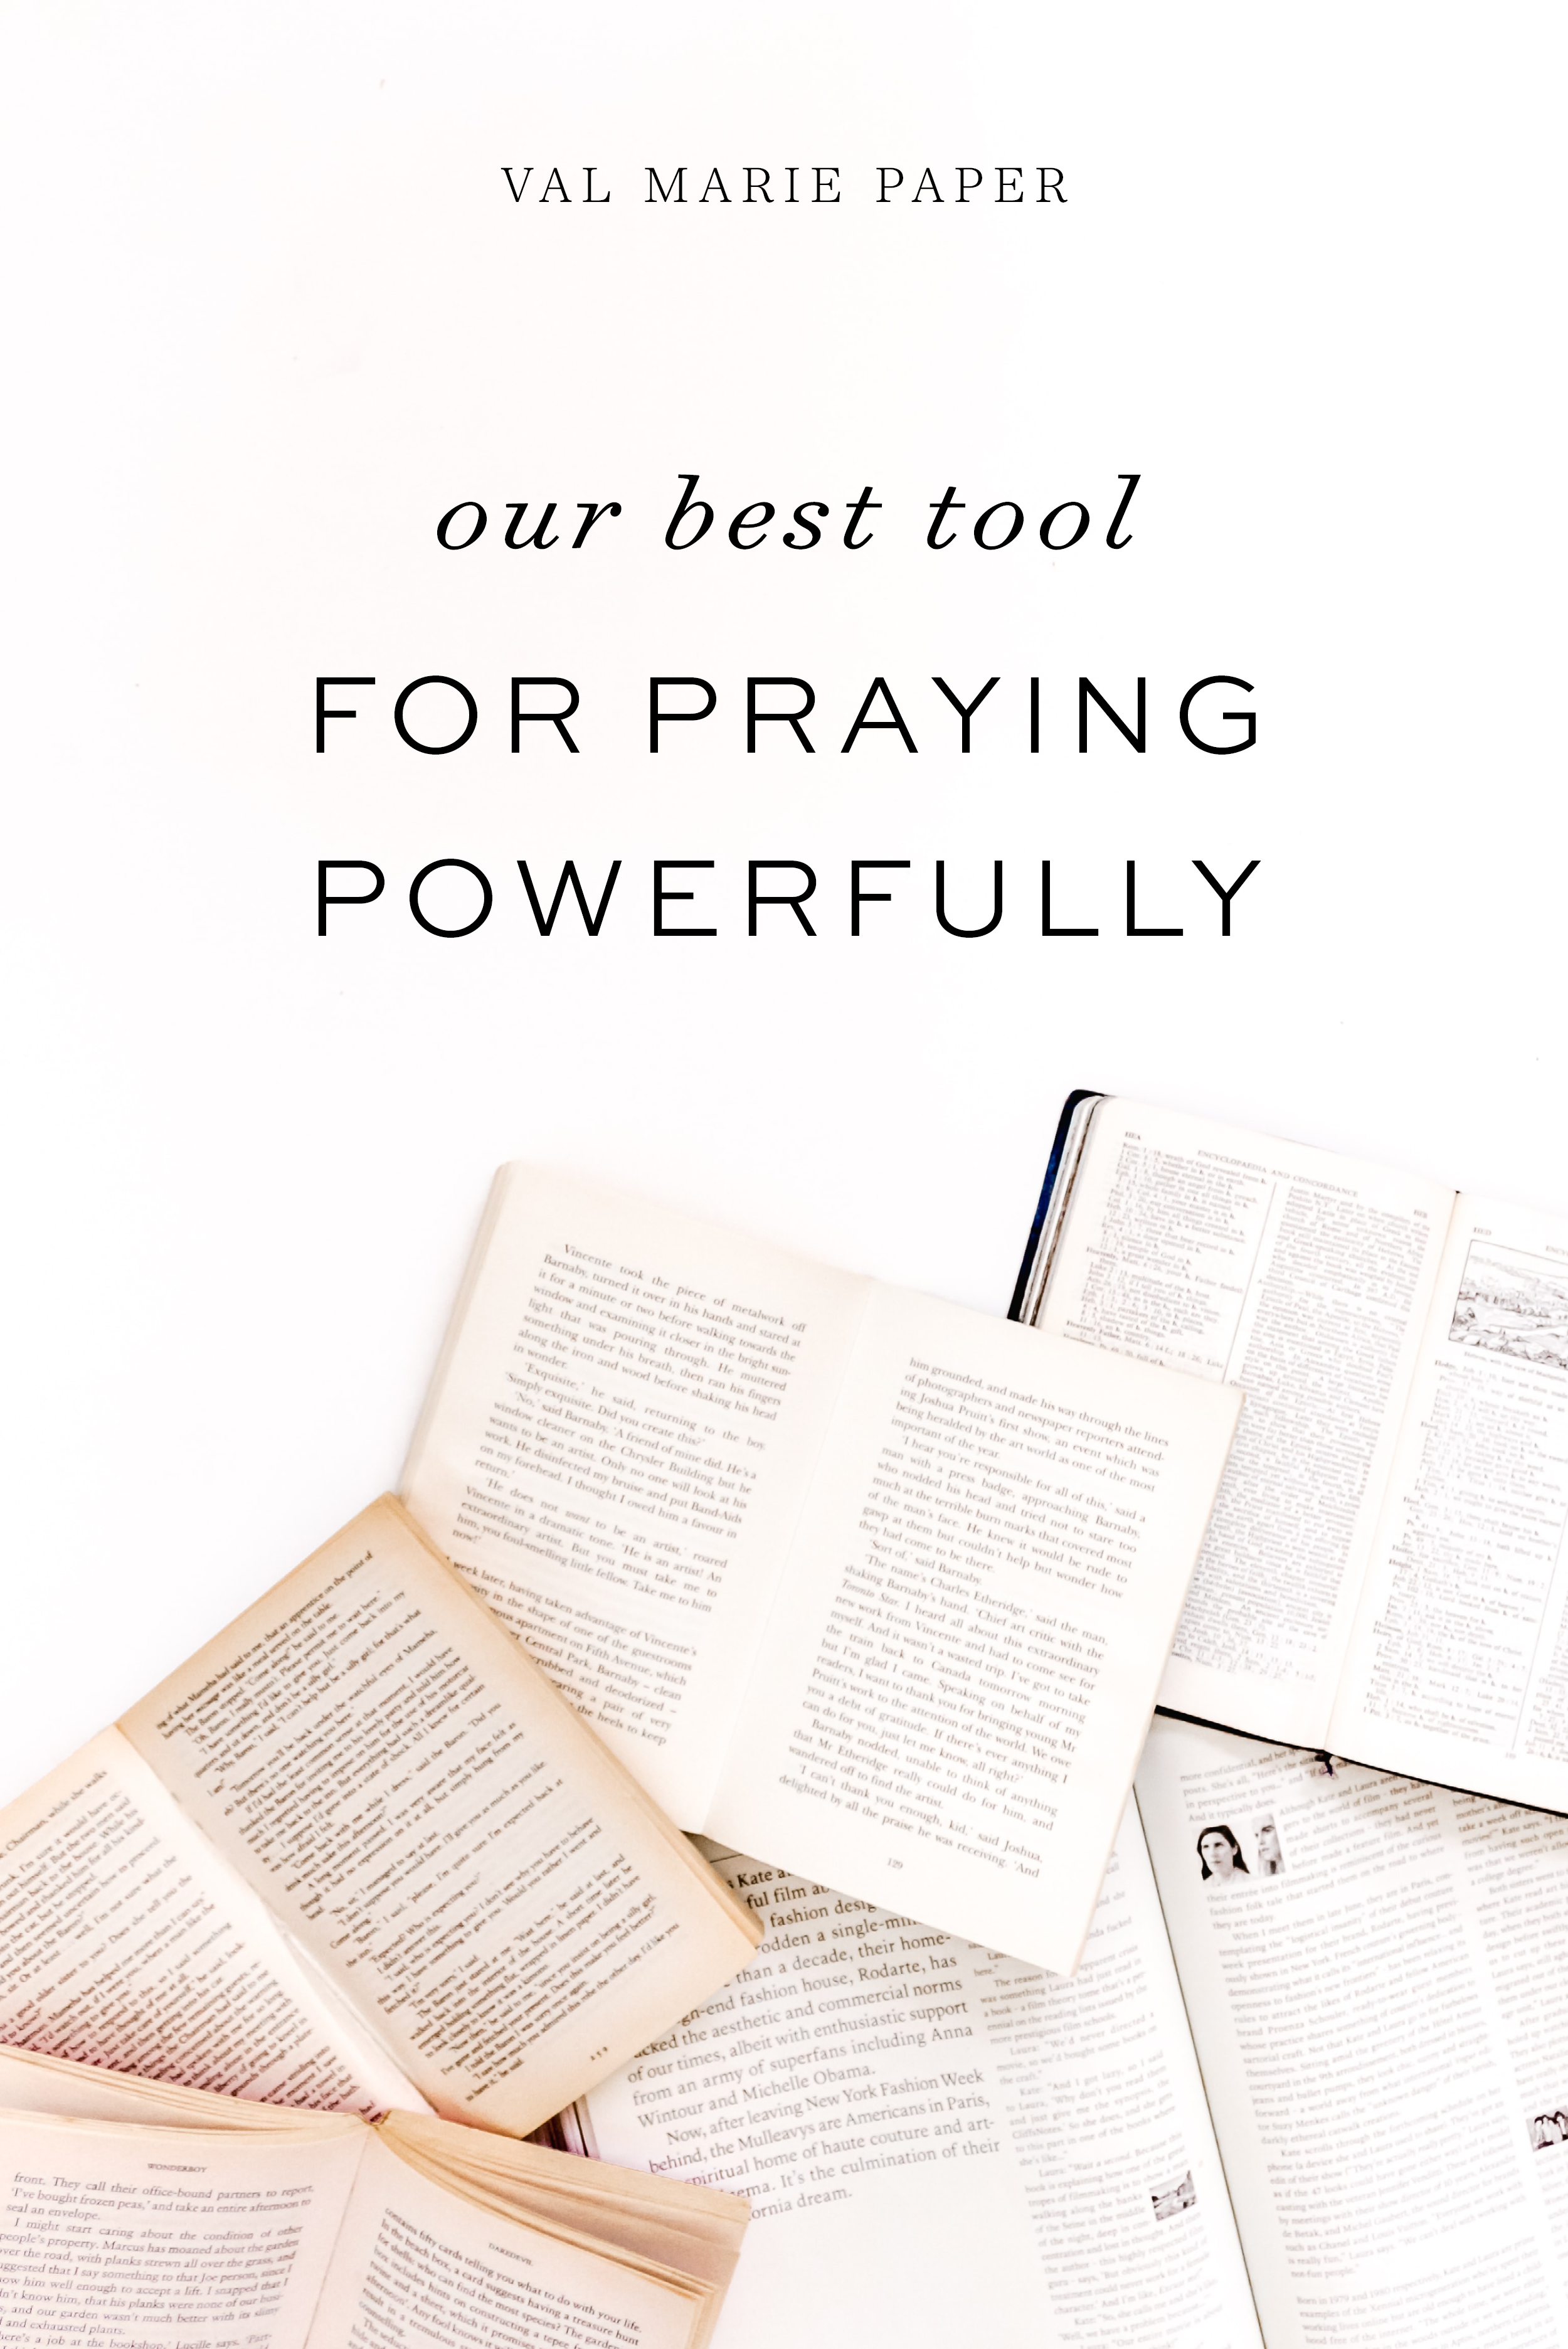 Our best tool for praying powerfully by Valerie Woerner, prayer journal, ministry, prayer, refresh, meditation, praying for your kids, husband, prayer warrior, war room, how to pray, pray scripture, praying scripture